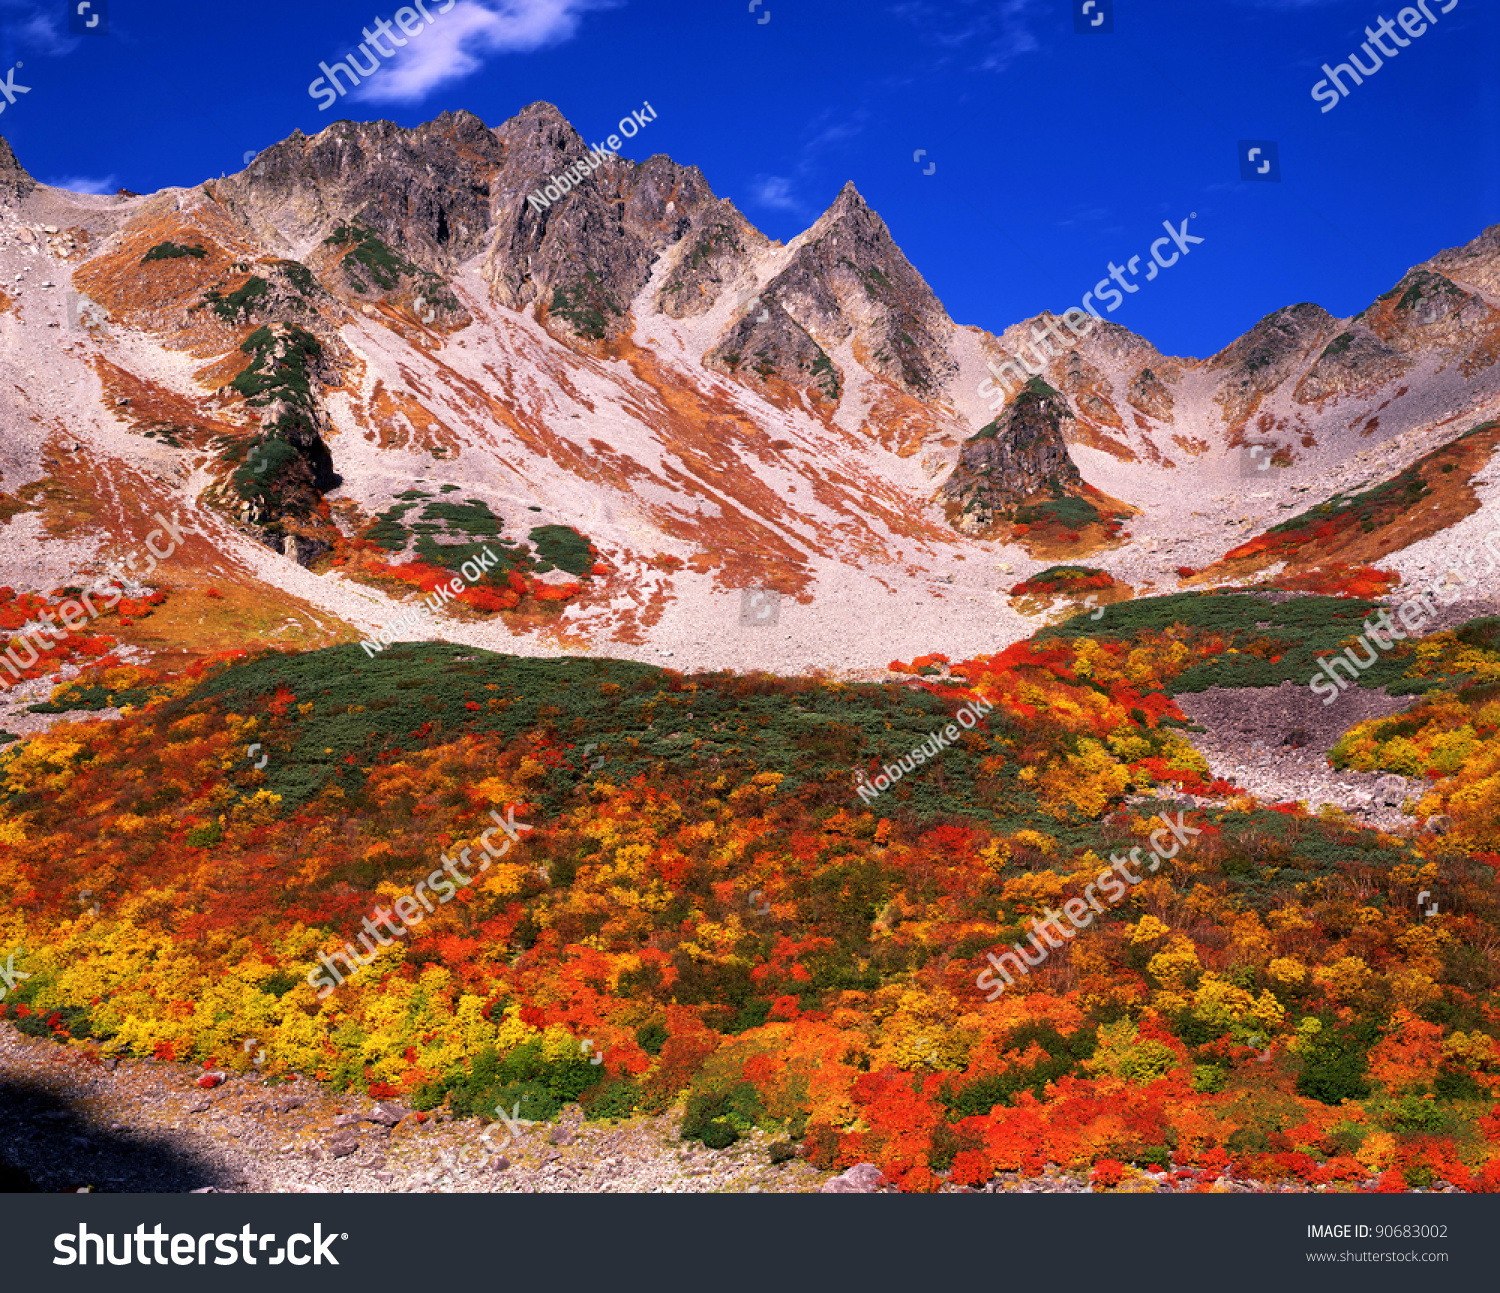 Autumn Colors In Japan Alps Stock Photo 90683002 : Shutterstock